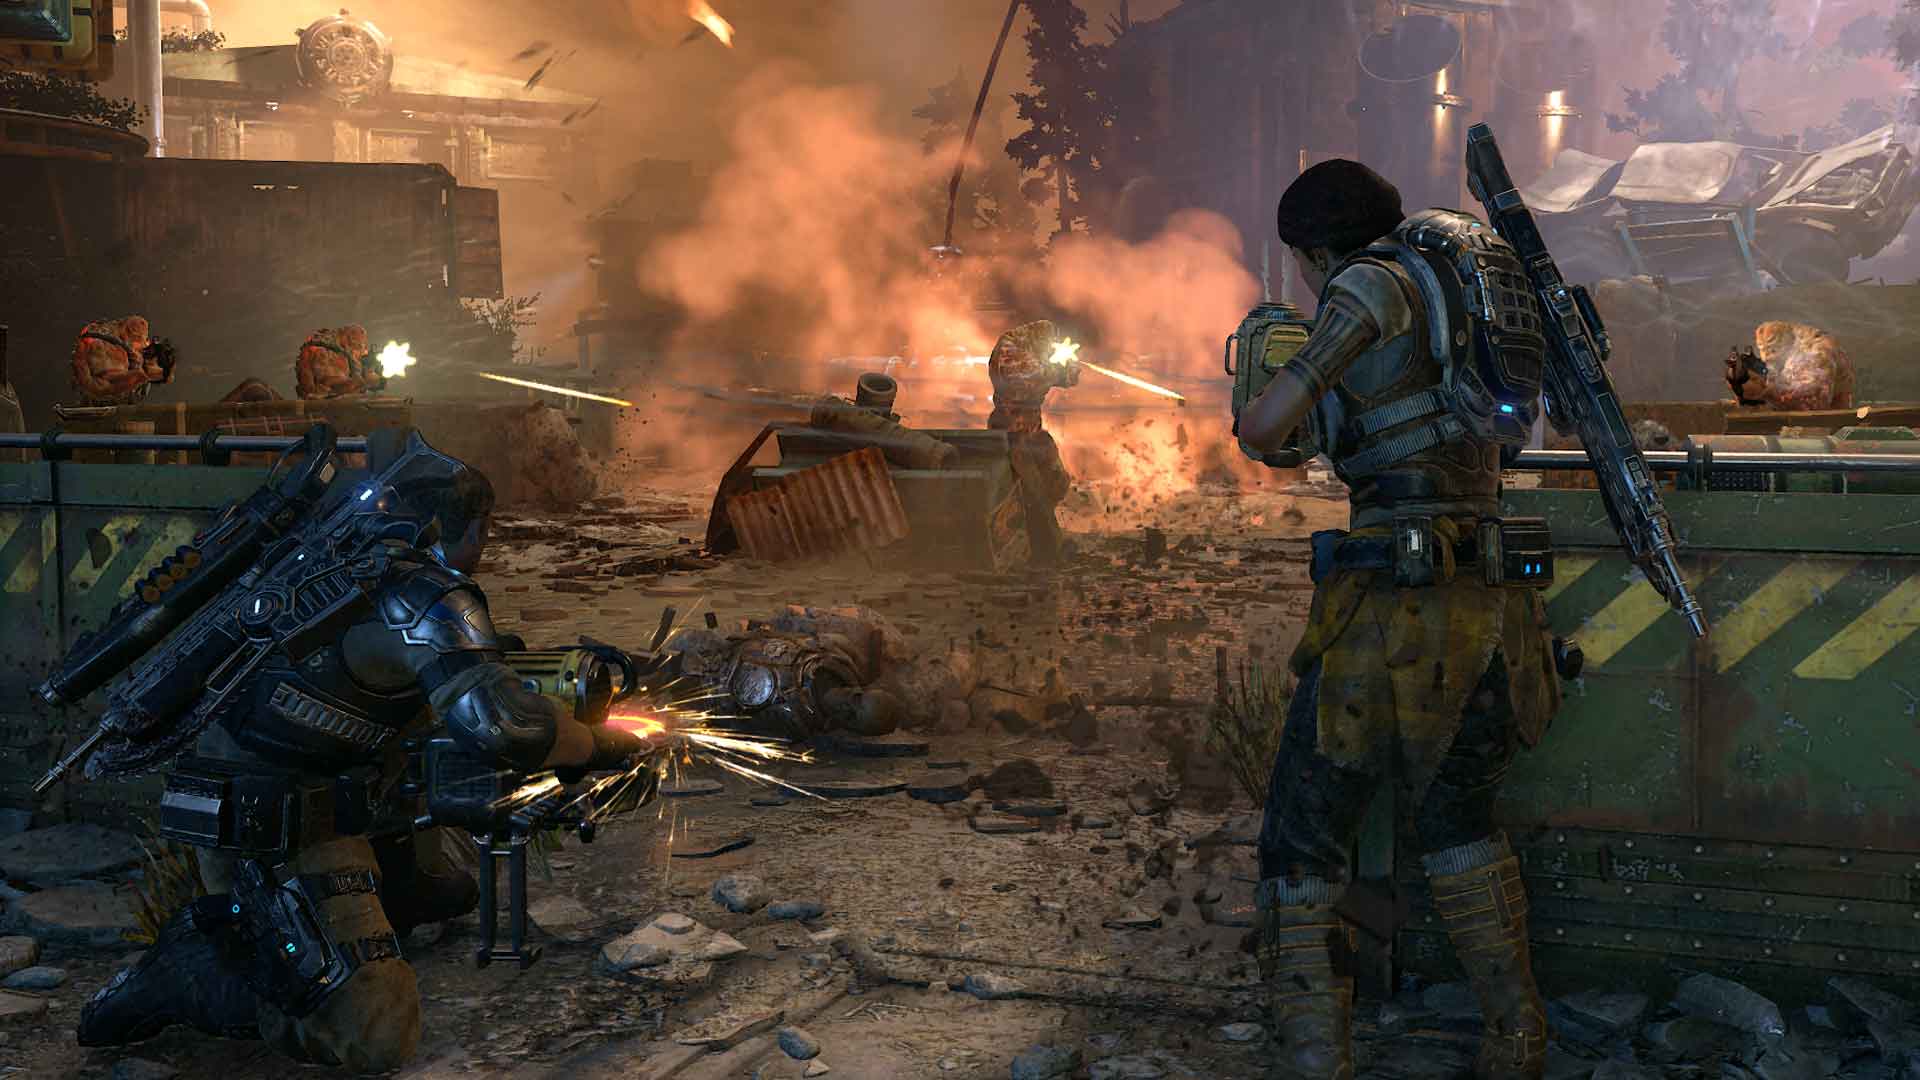 Gears Of War 4 Xbox One/PC Cross-Play Coming For Ranked Matches